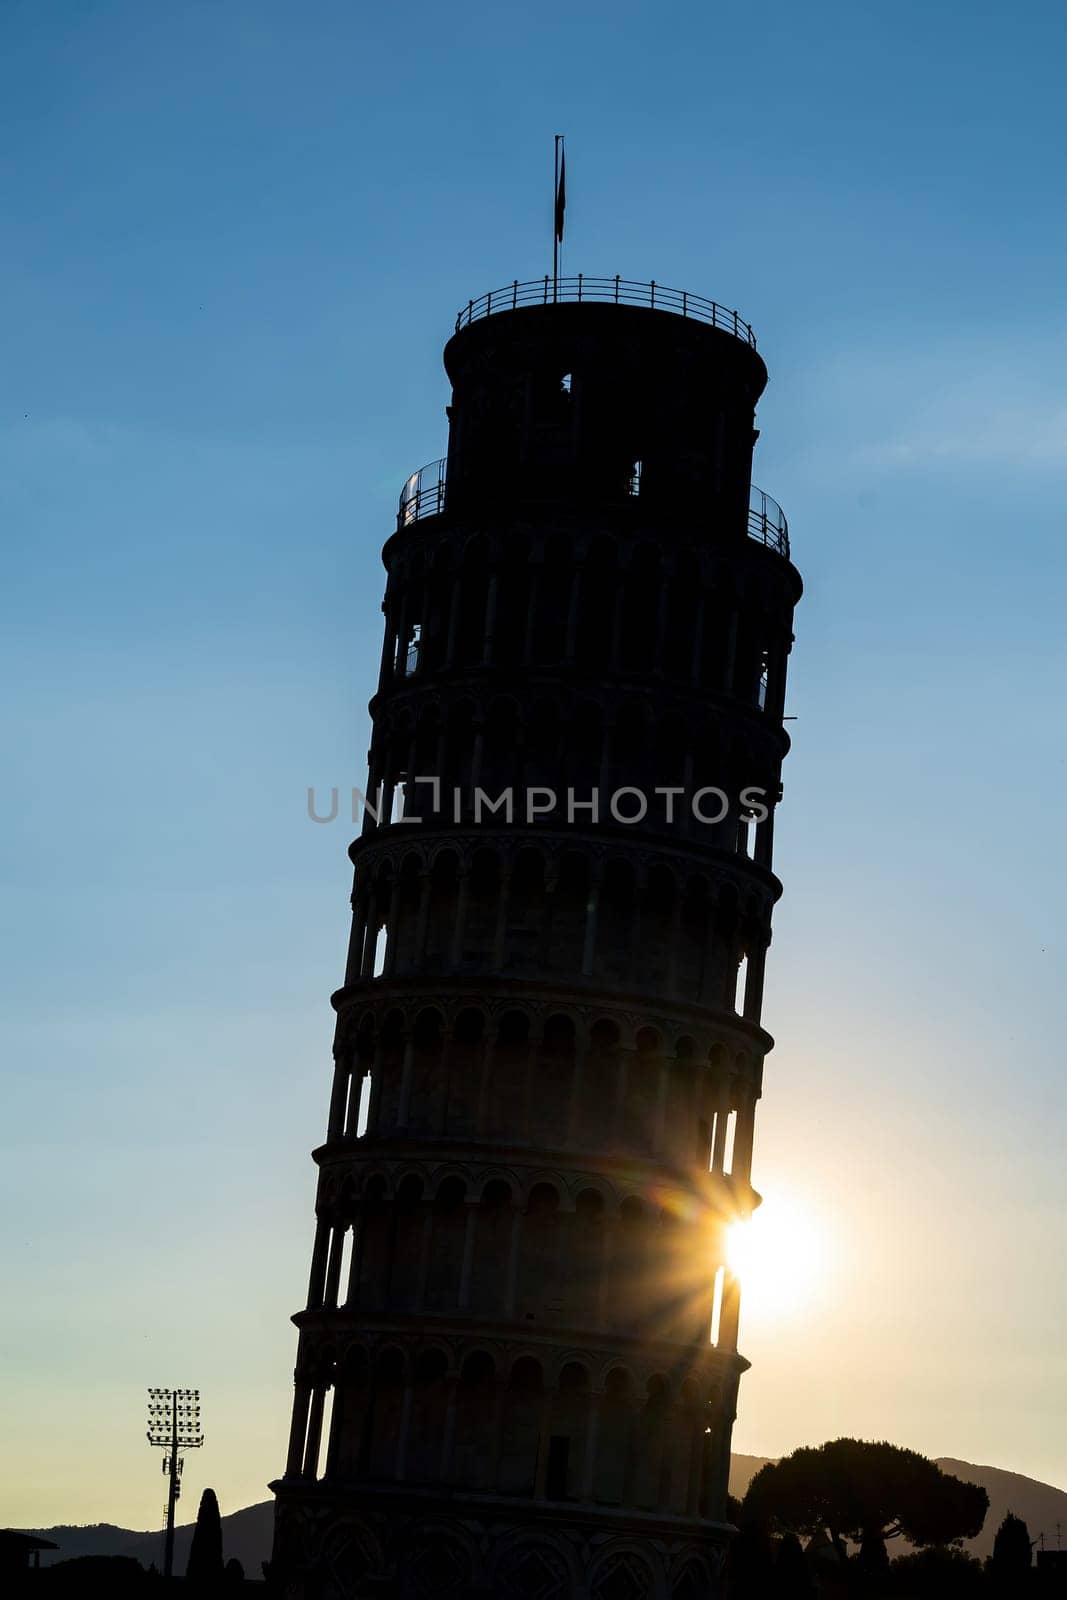 Silhouette shot of The famous Leaning Tower in Pisa, Italy by f11photo